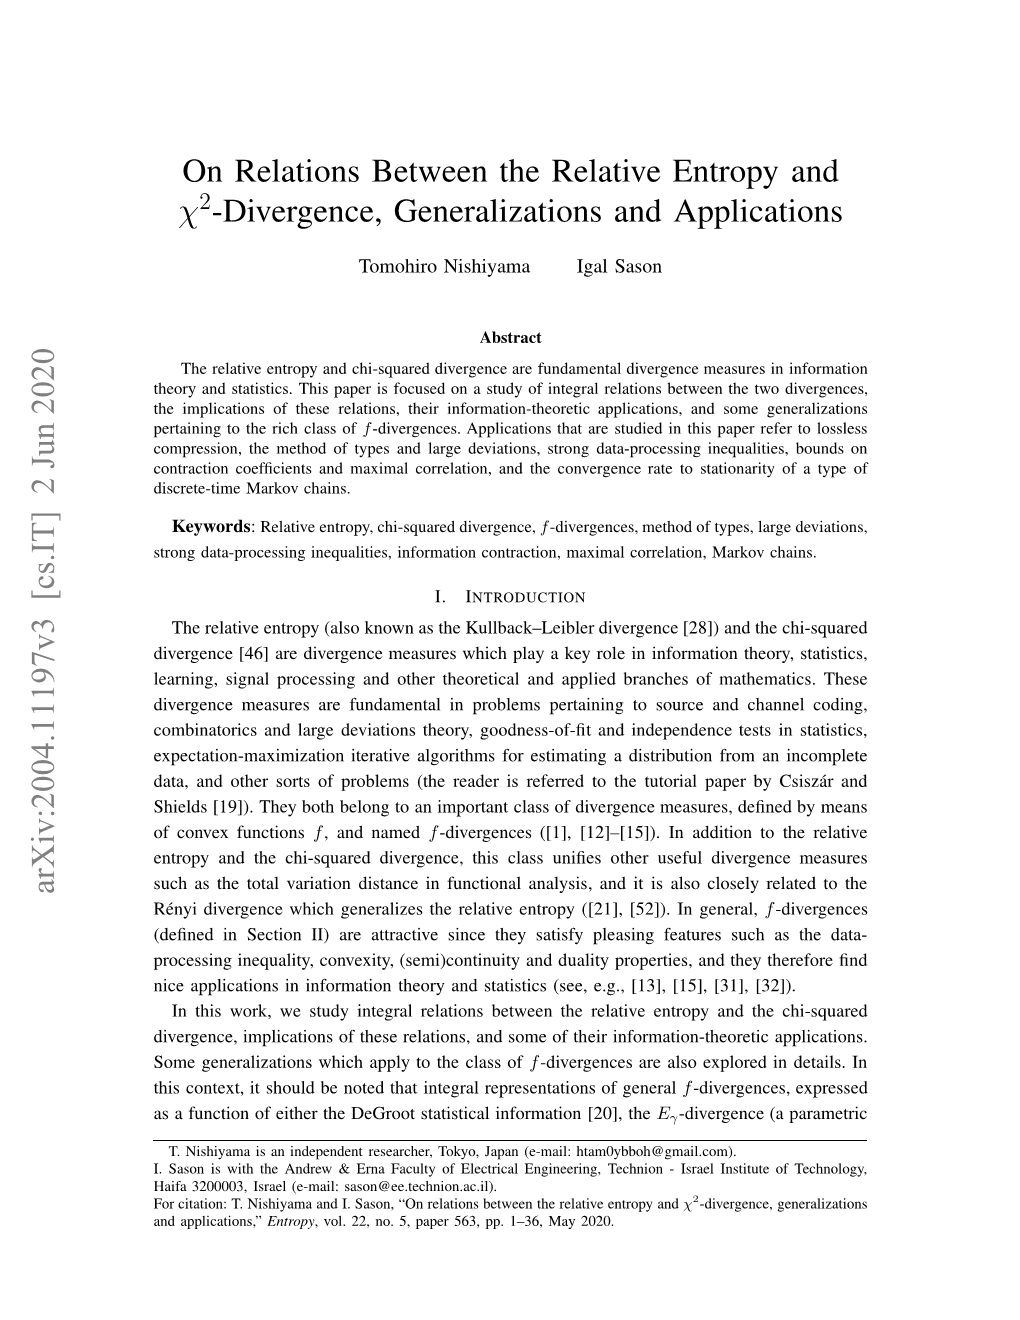 On Relations Between the Relative Entropy and $\Chi^ 2$-Divergence